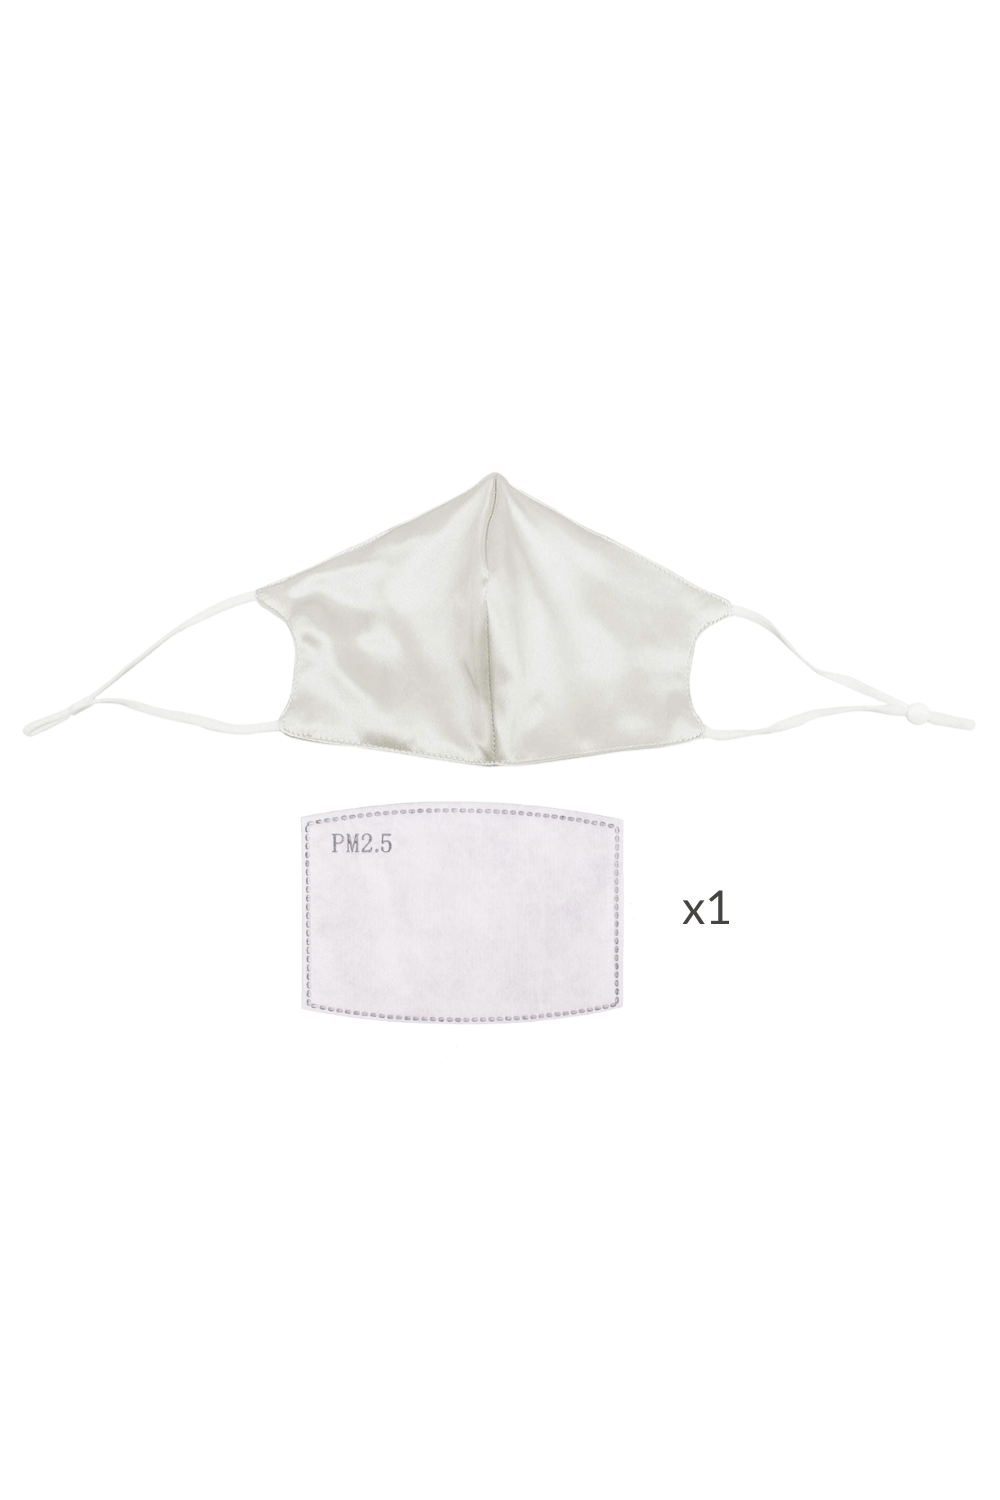 STELLAR Silk Face Mask - Pearl White (with Nose Wire and Filter Pocket) - BASK ™